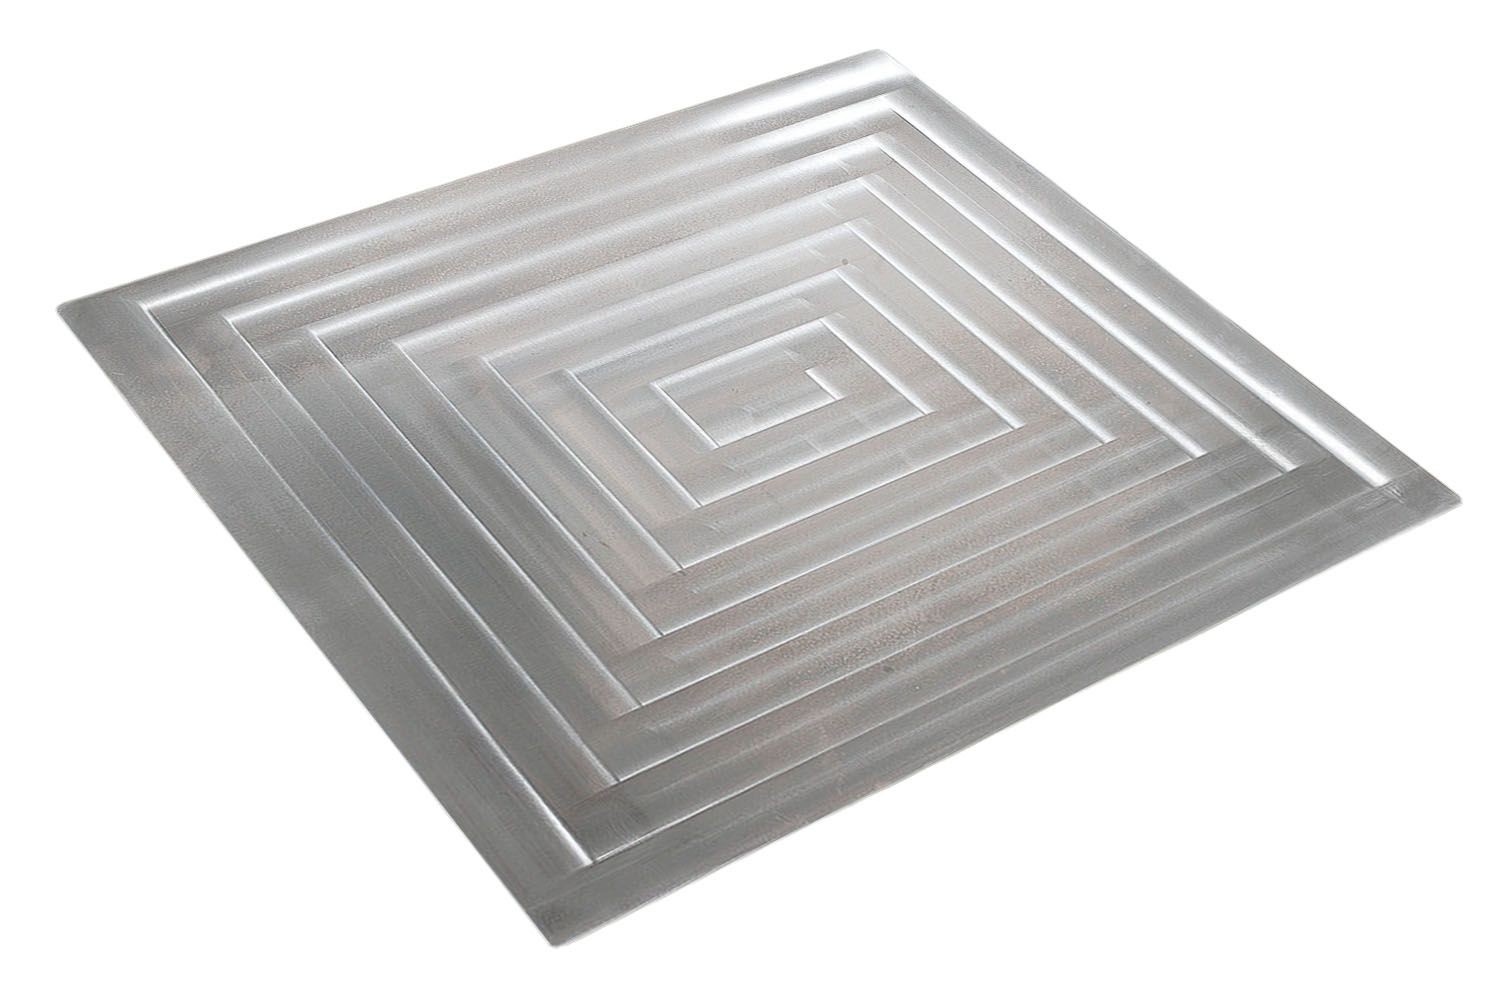 Bon Chef 52103 EZ Fit Rectangle Stainless Steel 1 1/2 Size Tile, 19 1/8" x 20 3/16"